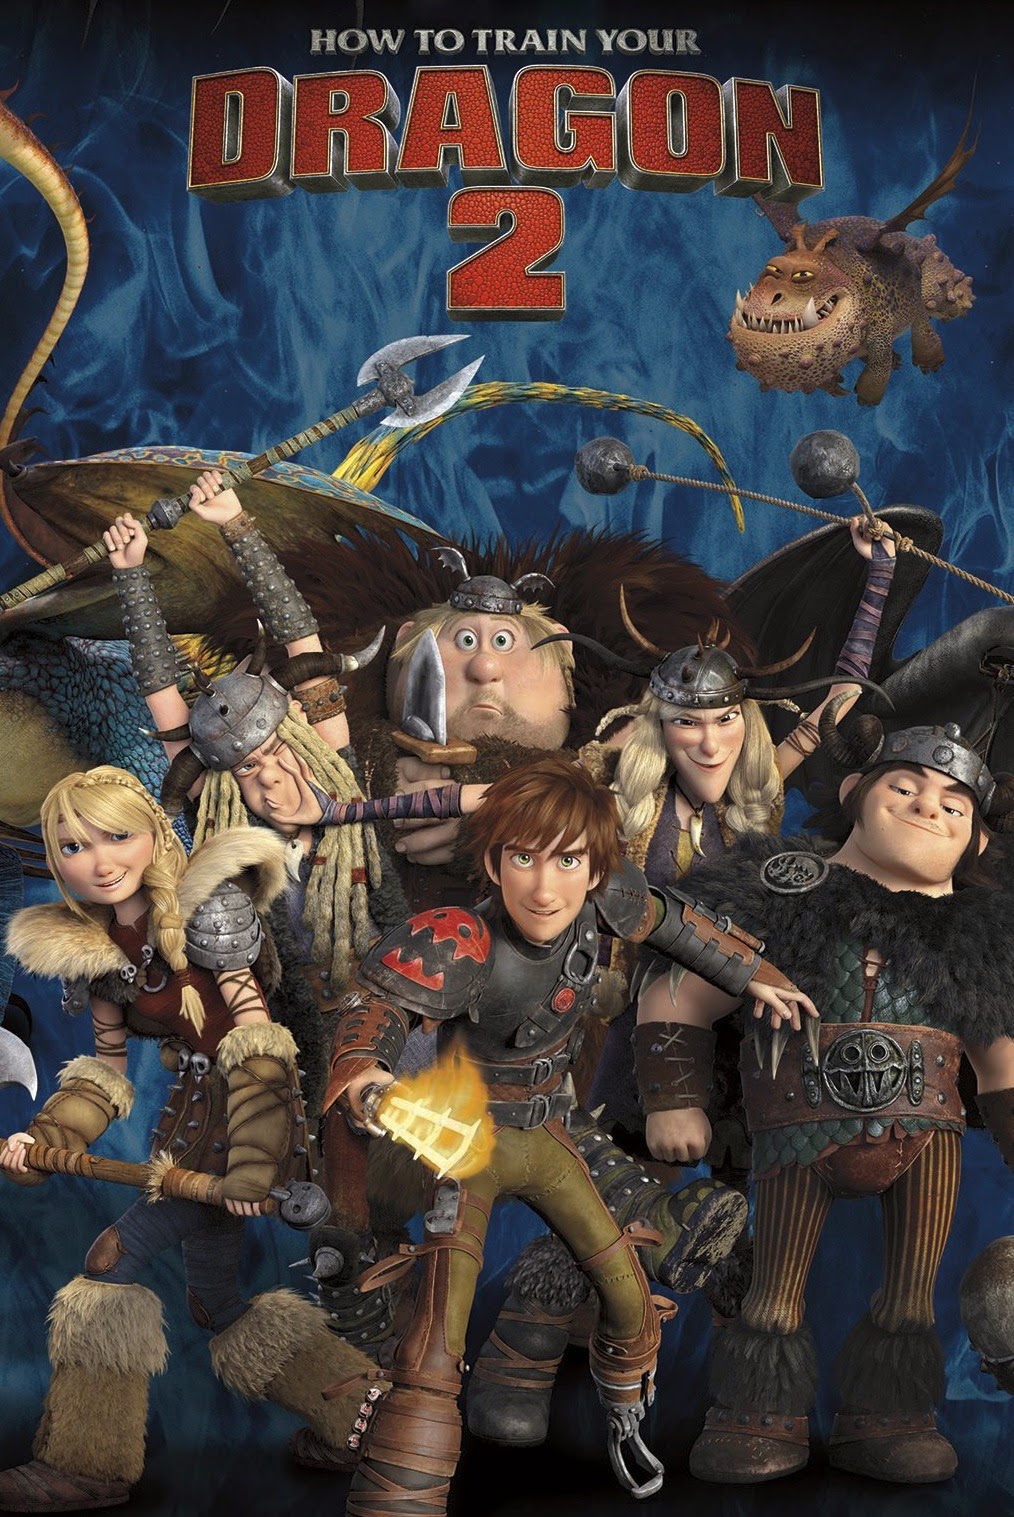 How To Train Your Dragon 2 (2014) WEB-DL Full Movie + Subtitle Indonesia